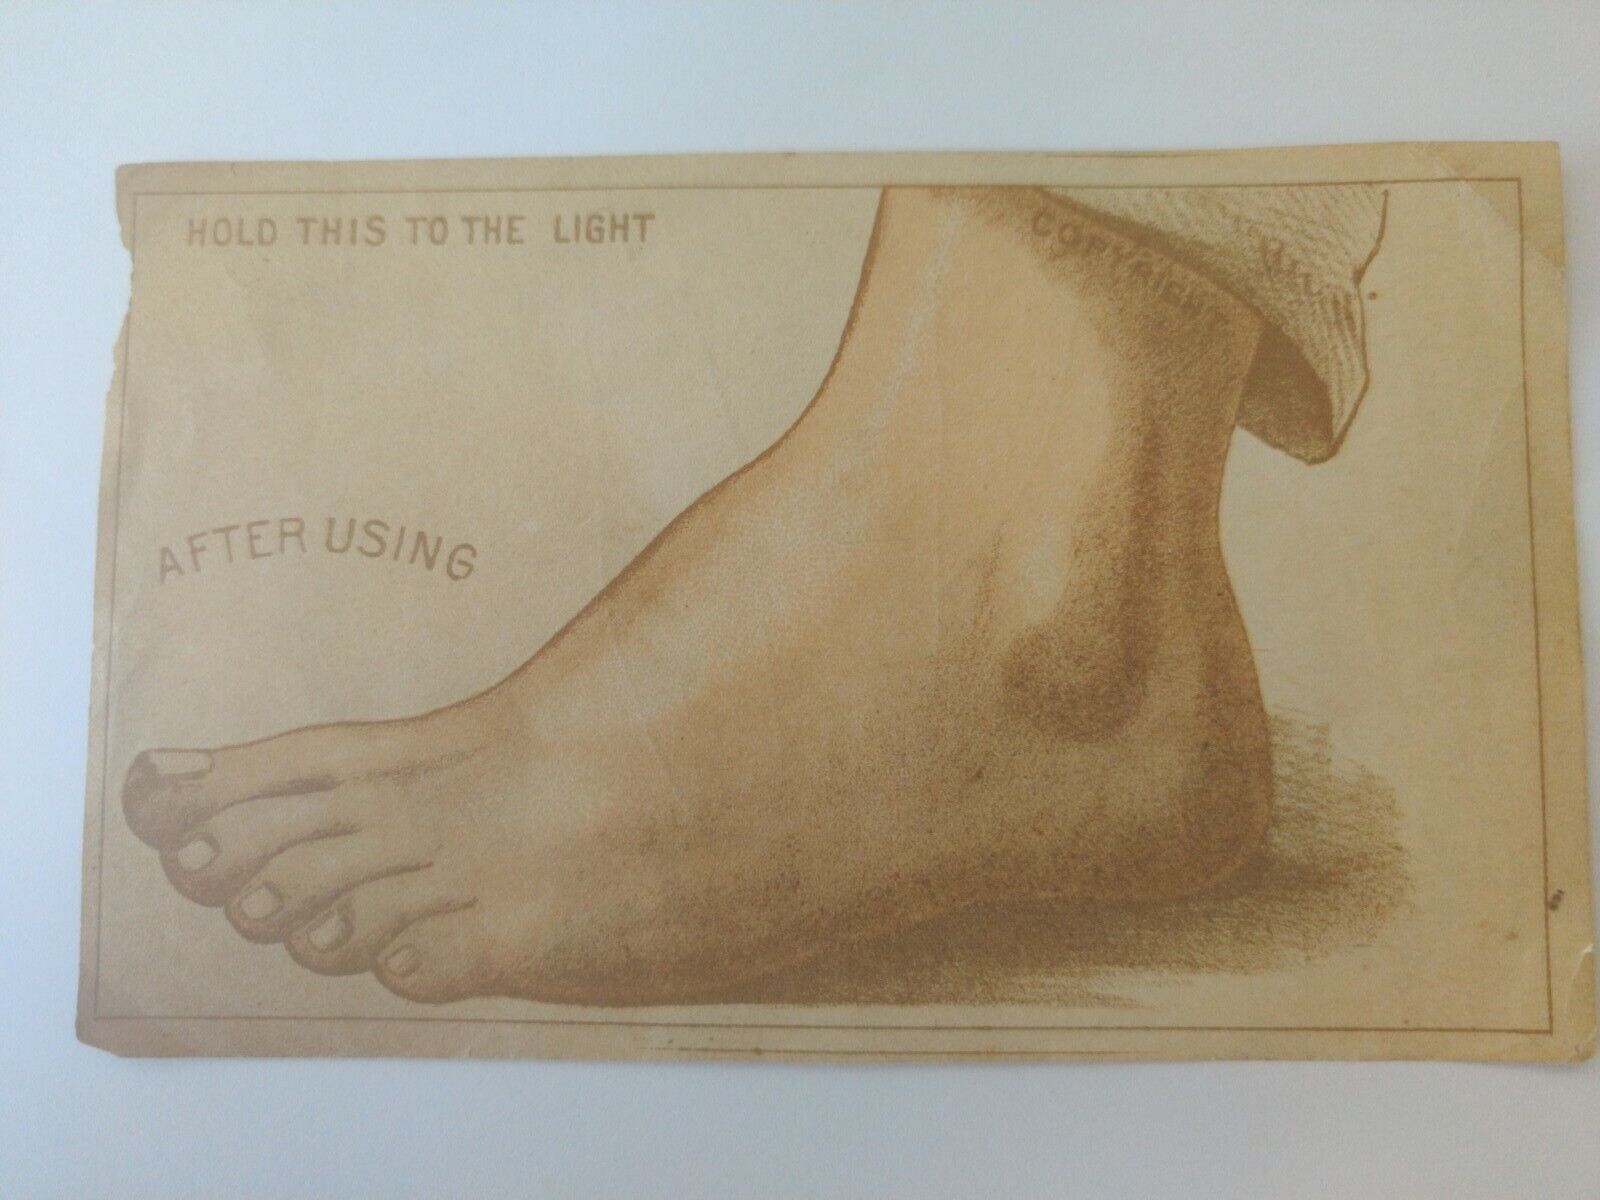 vintage paper advertise Kohler\'s one night corn cure antidote hold to light foot